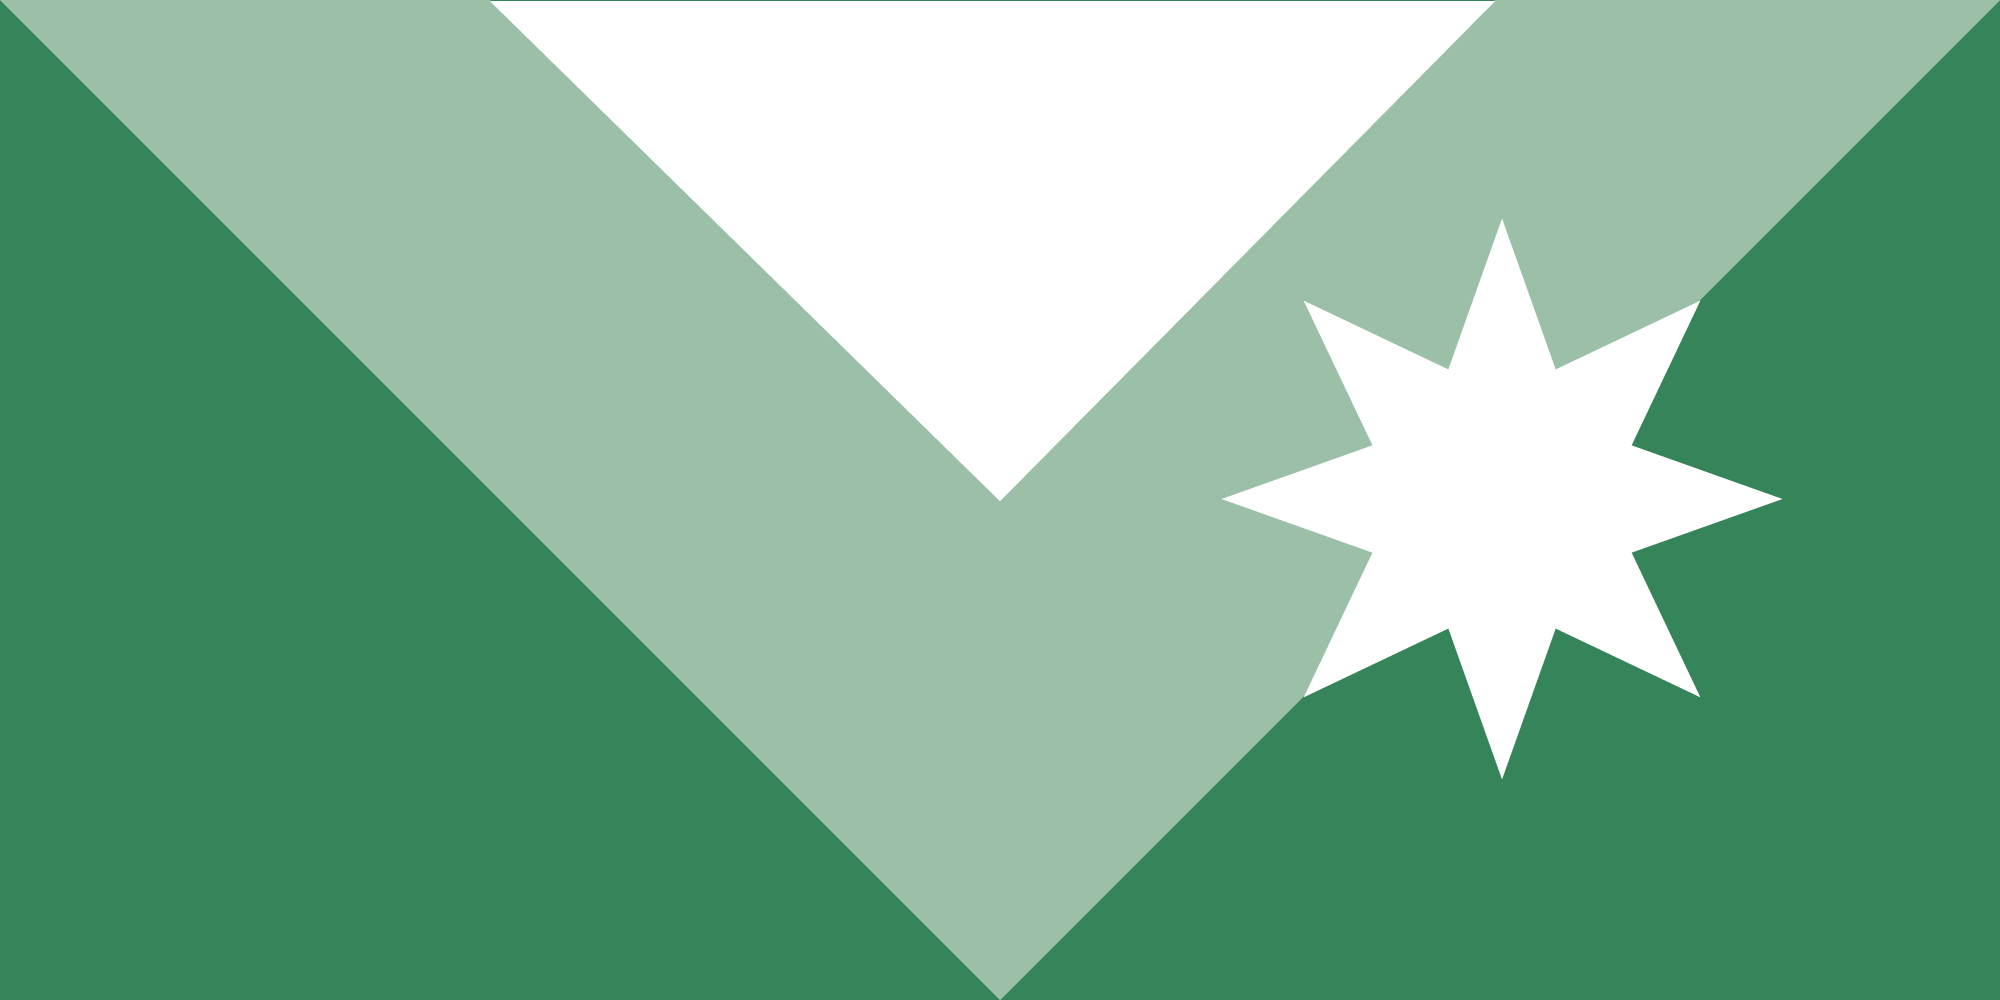 A state flag proposal for TAS